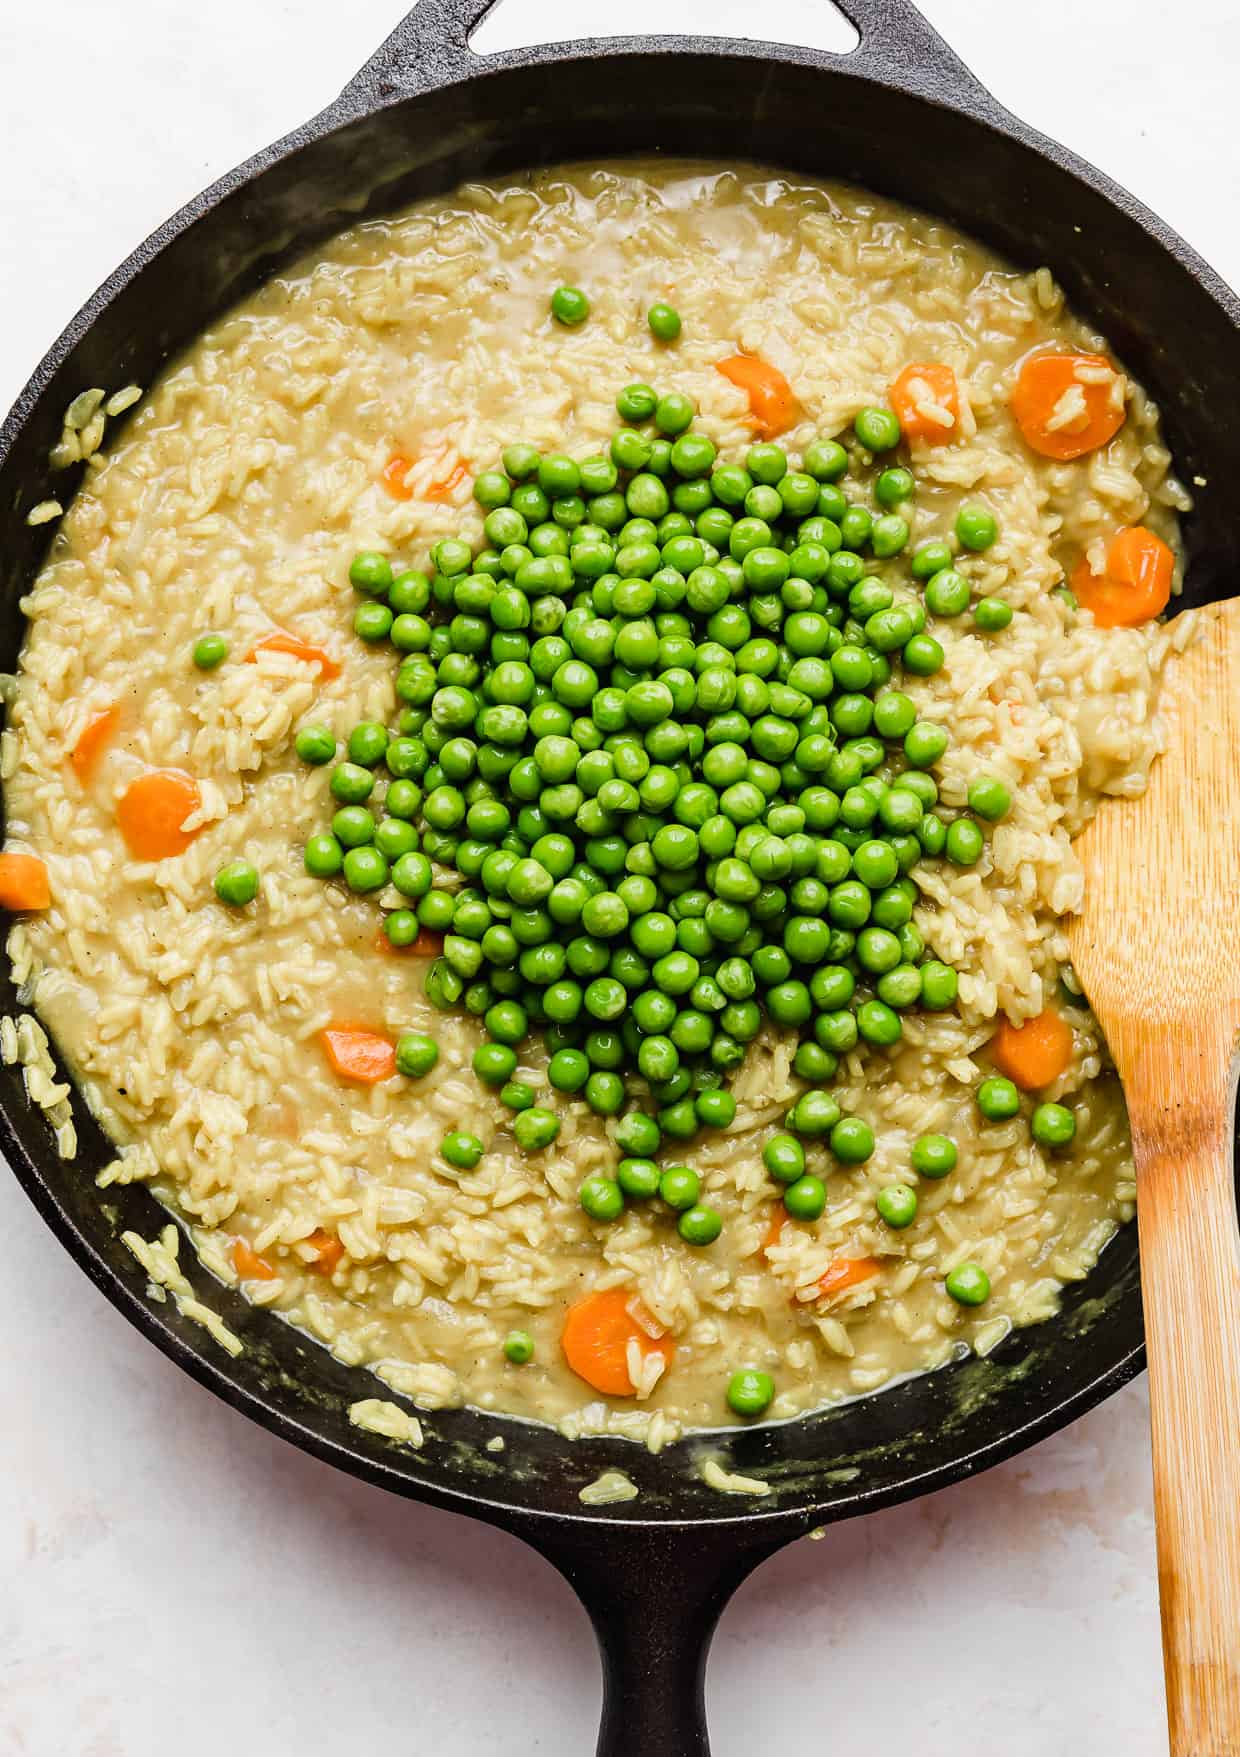 Peas in a skillet filled with Curry Chicken Rice and Peas recipe.